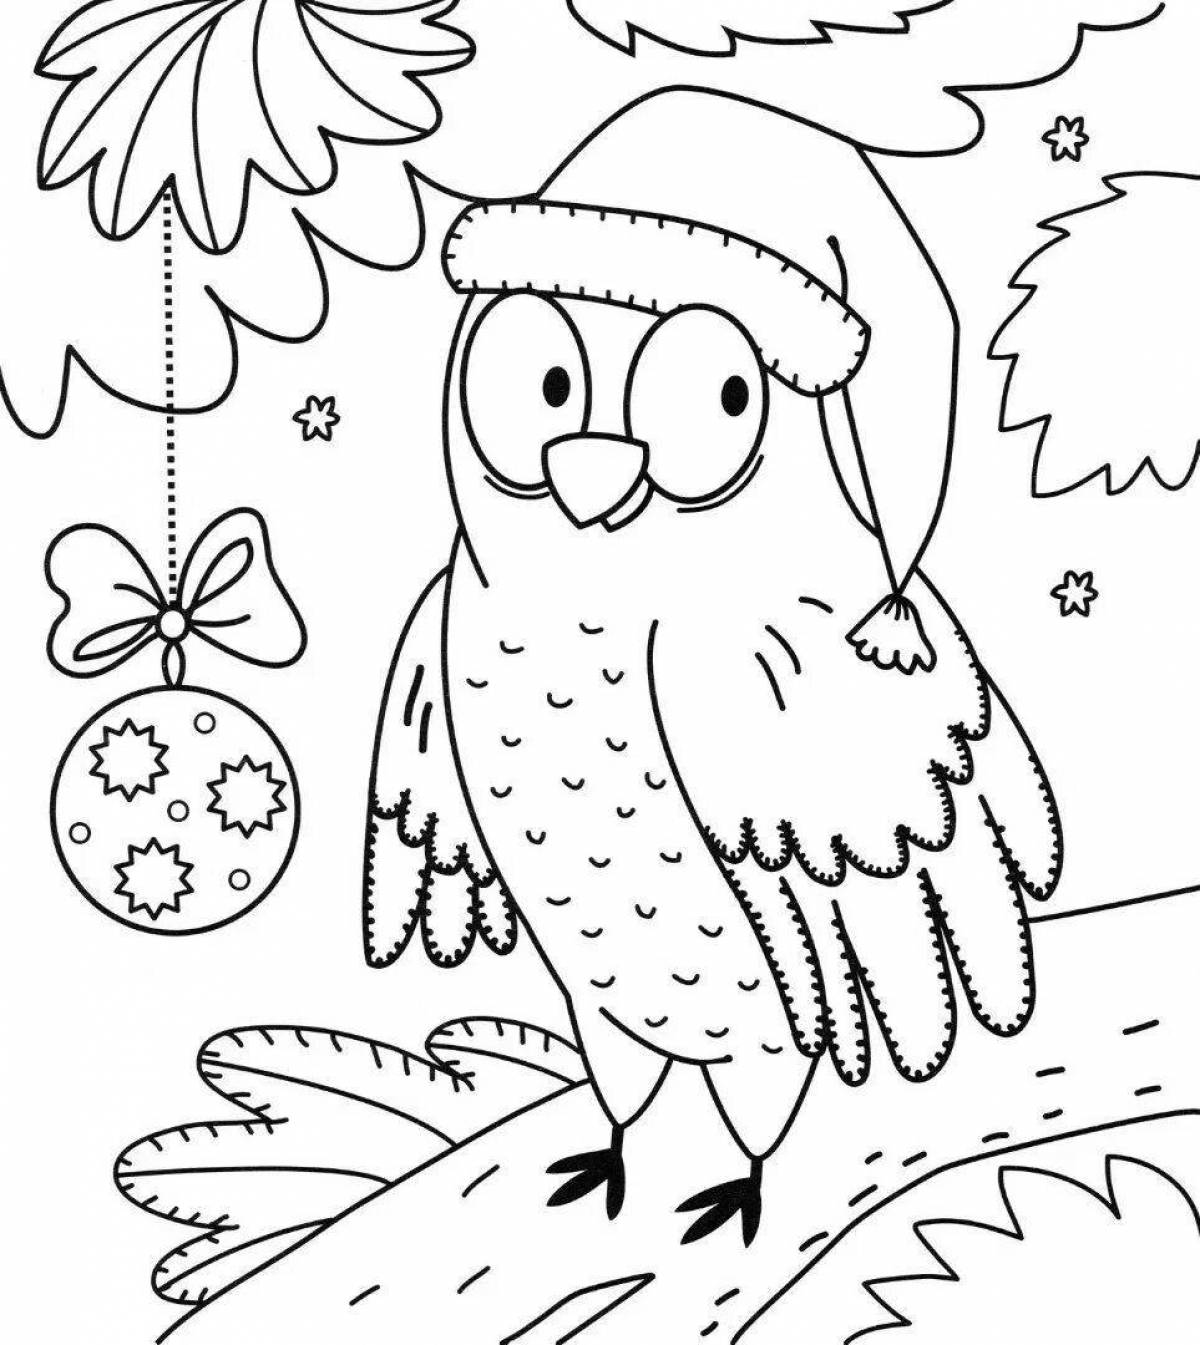 Incredible coloring book for kids